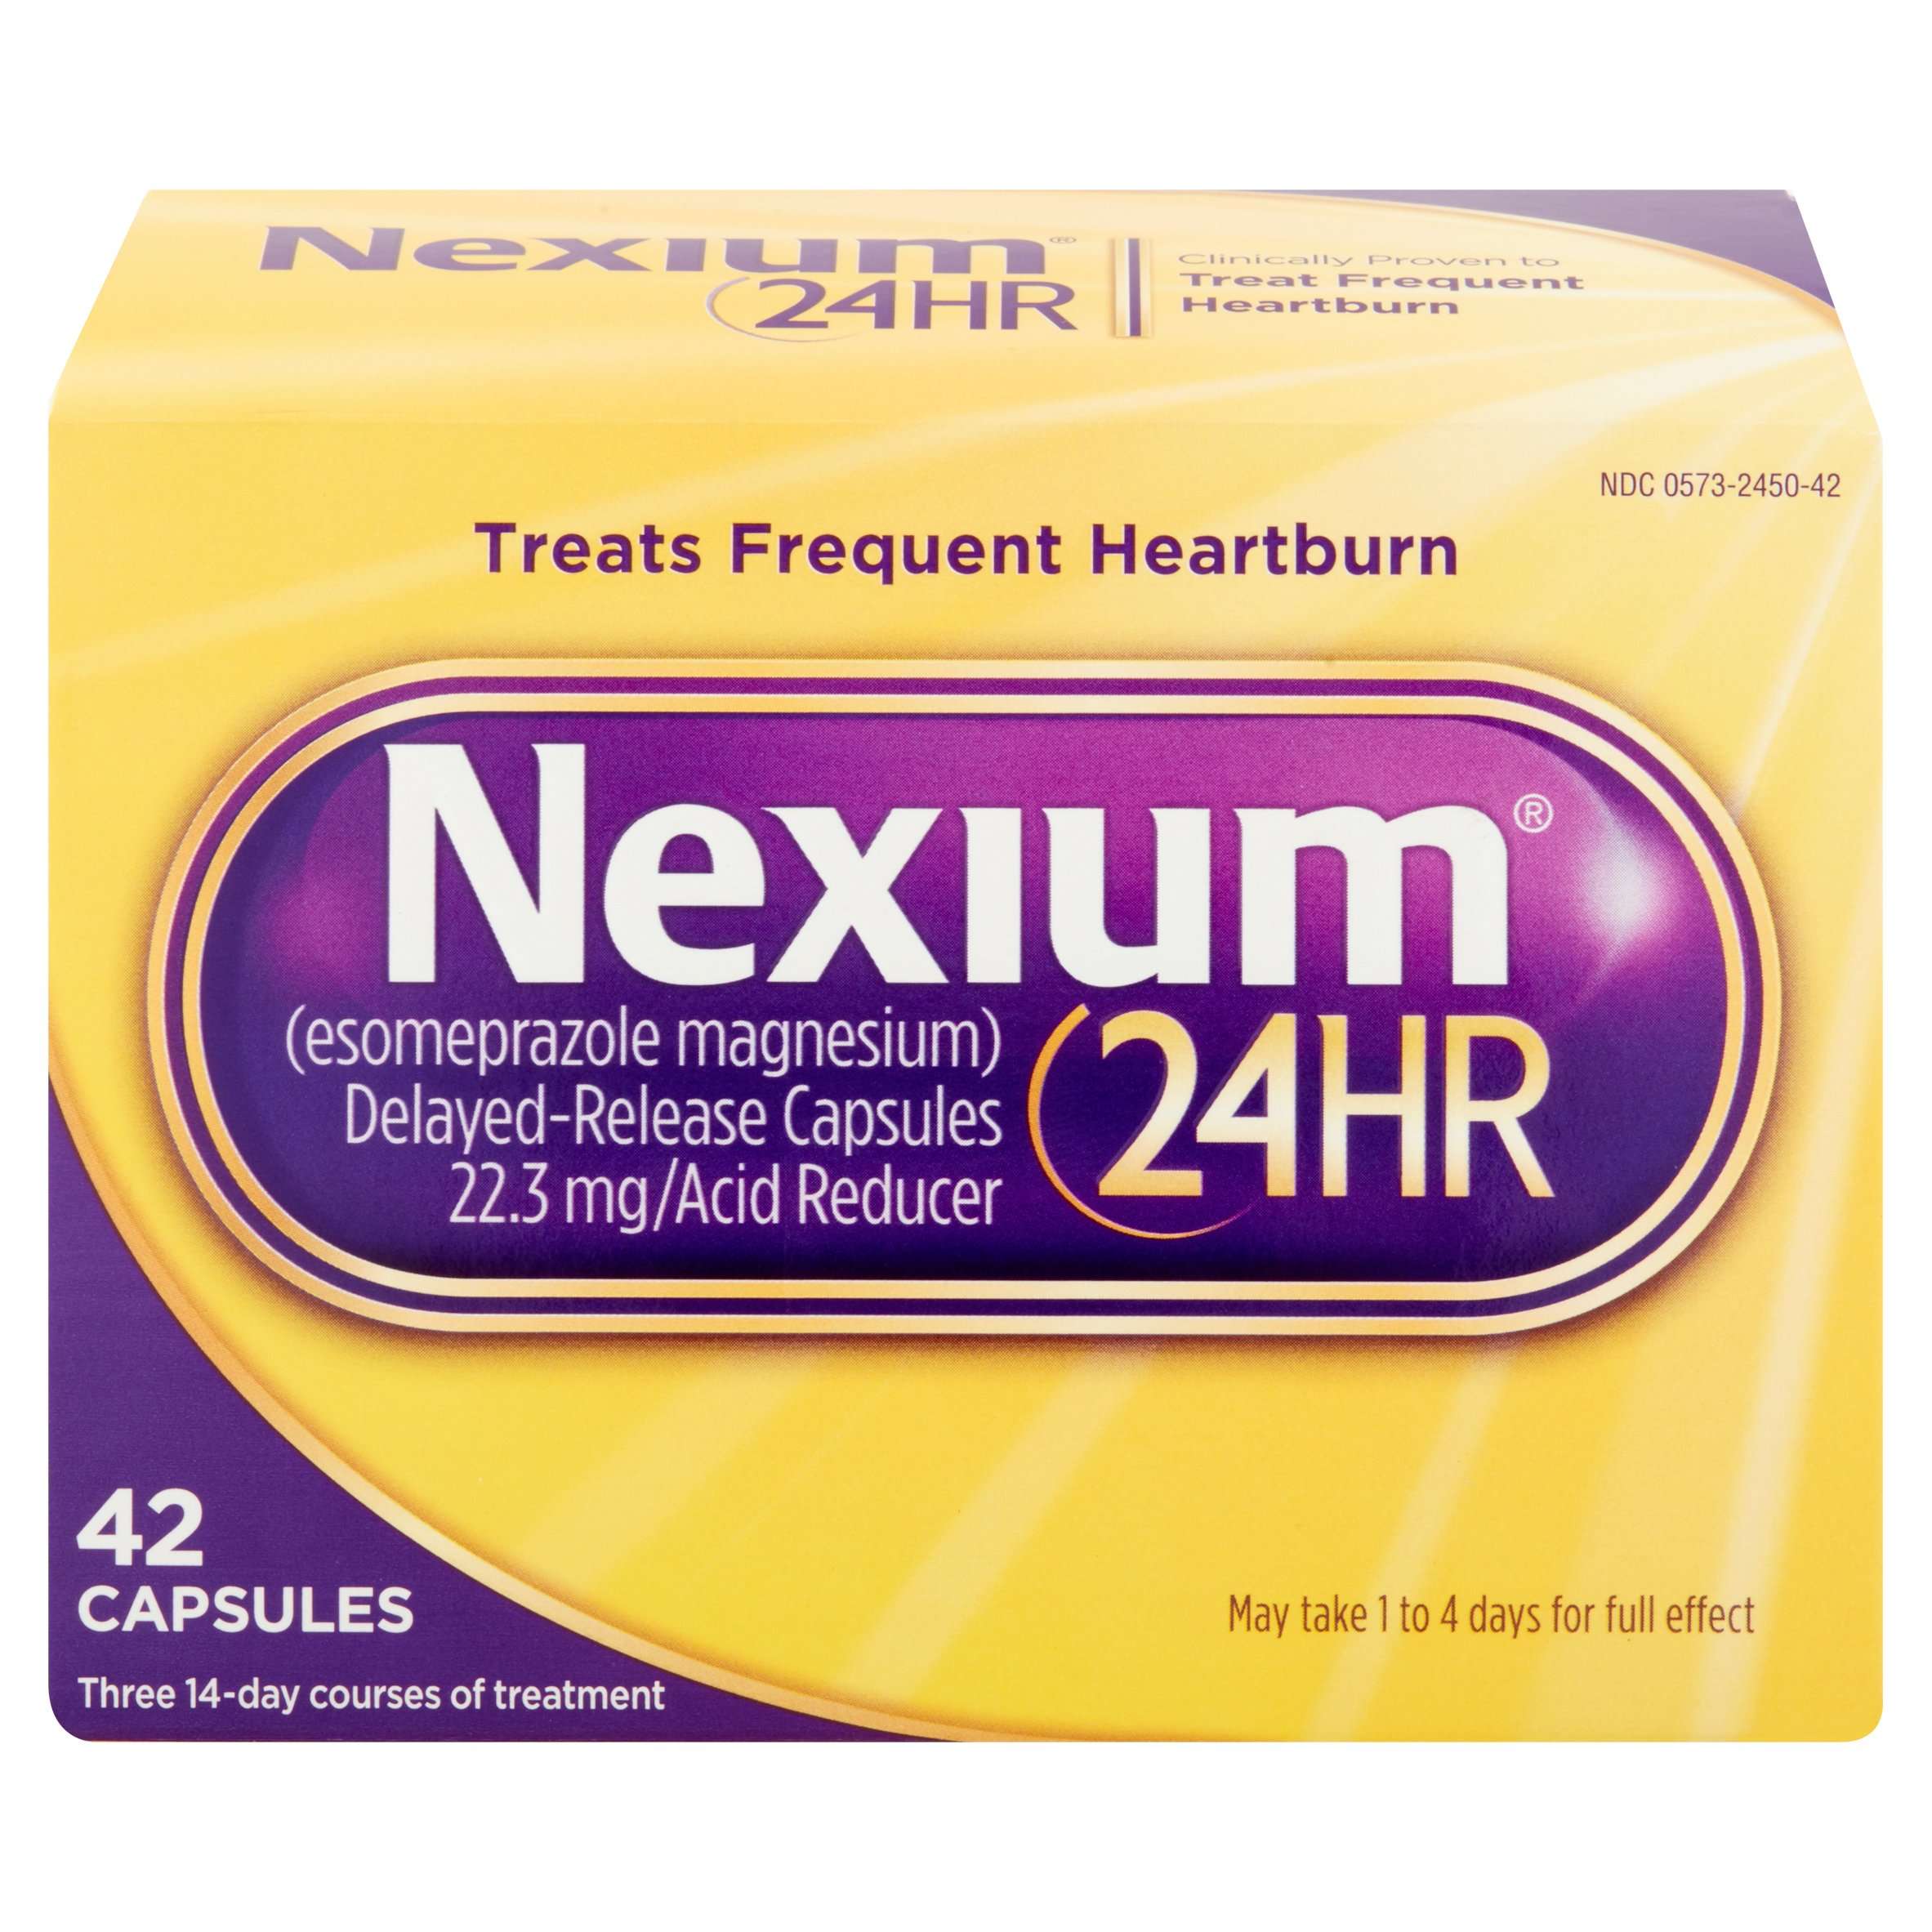 Can I take other medications while using Nexium ...